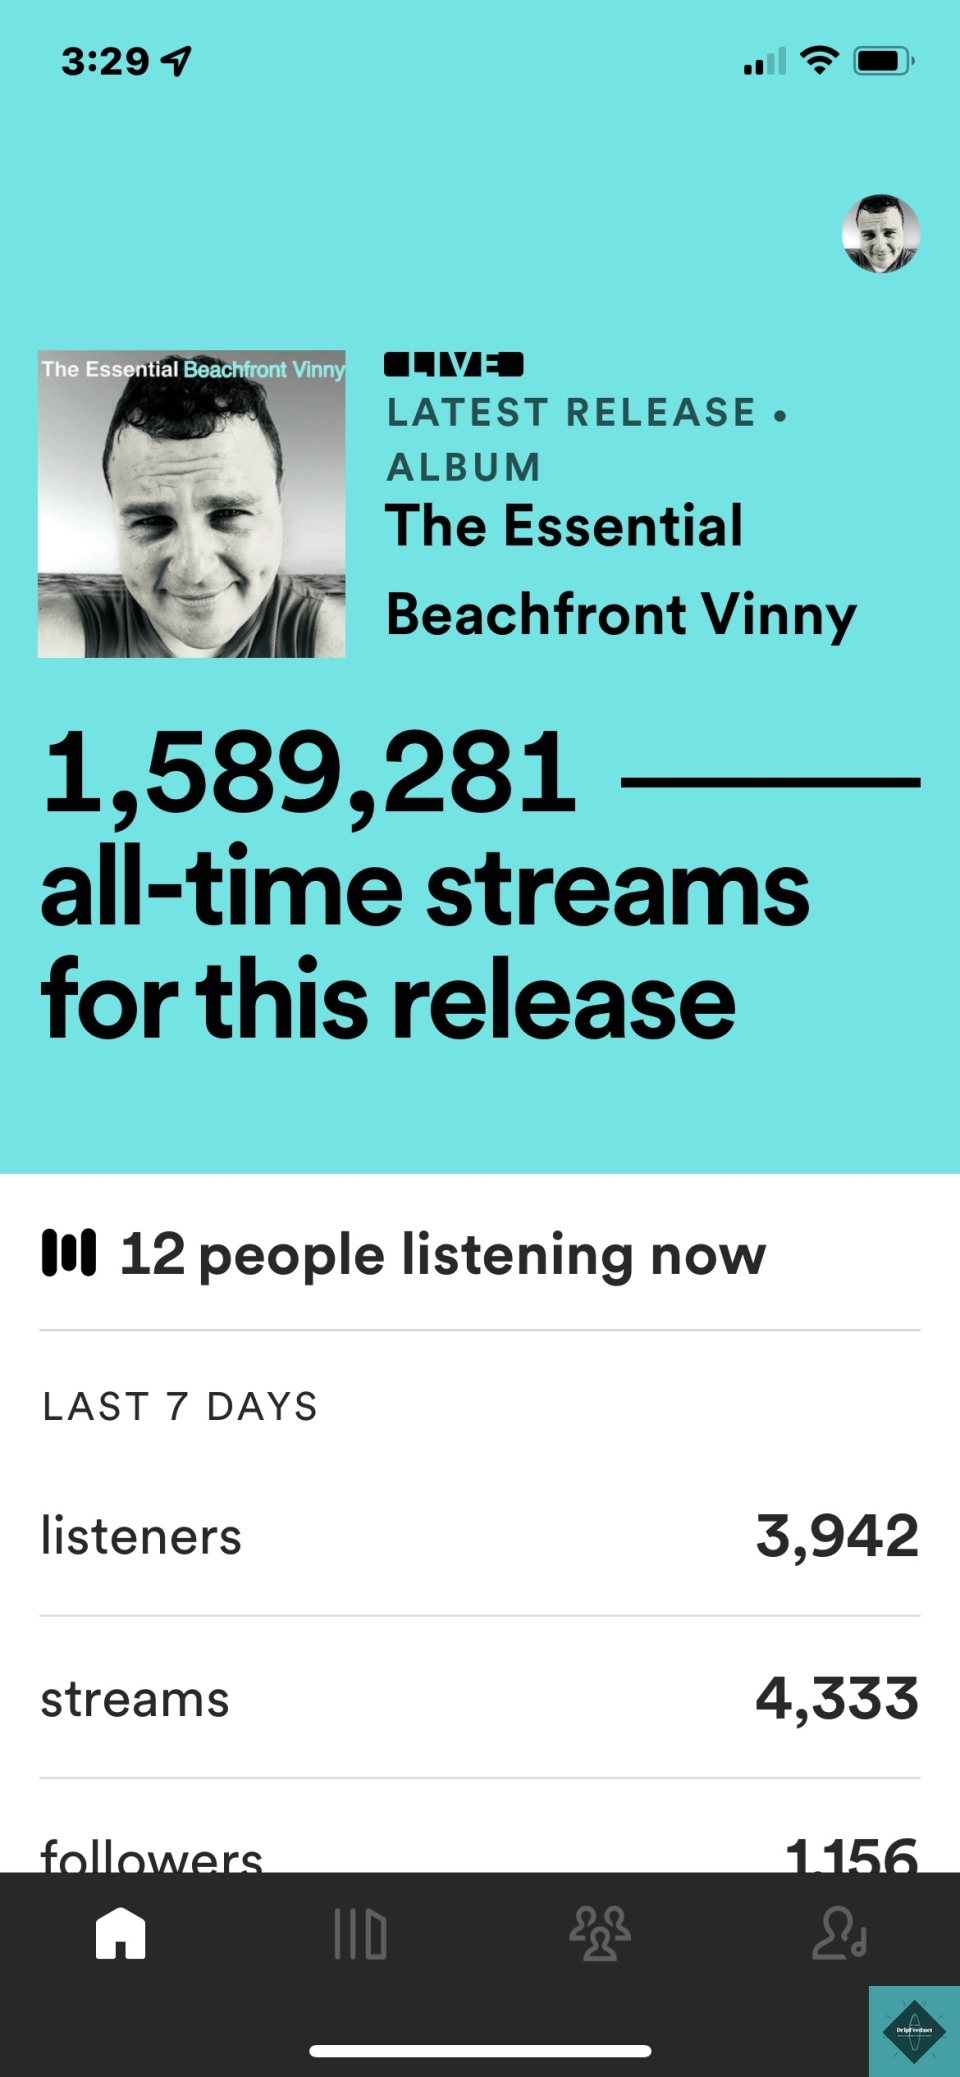 The most downloaded new surf guitarist on Spotify